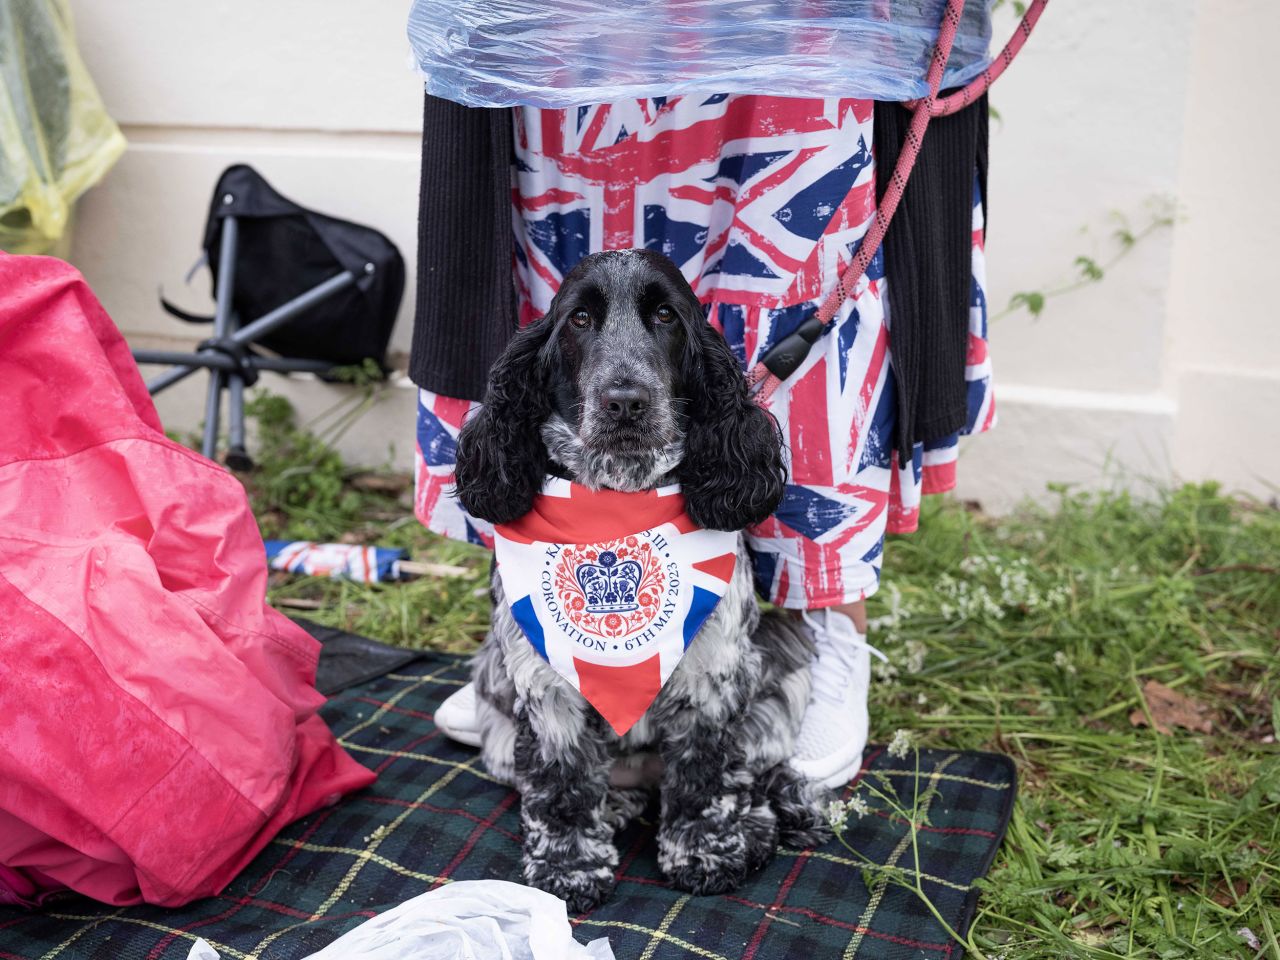 Tilly the dog wears a special bandana for the coronation. "It's damp but we wouldn't have missed it," said Tilly's owner, Helen. "It's only the Brits that do pomp and ceremony like this."